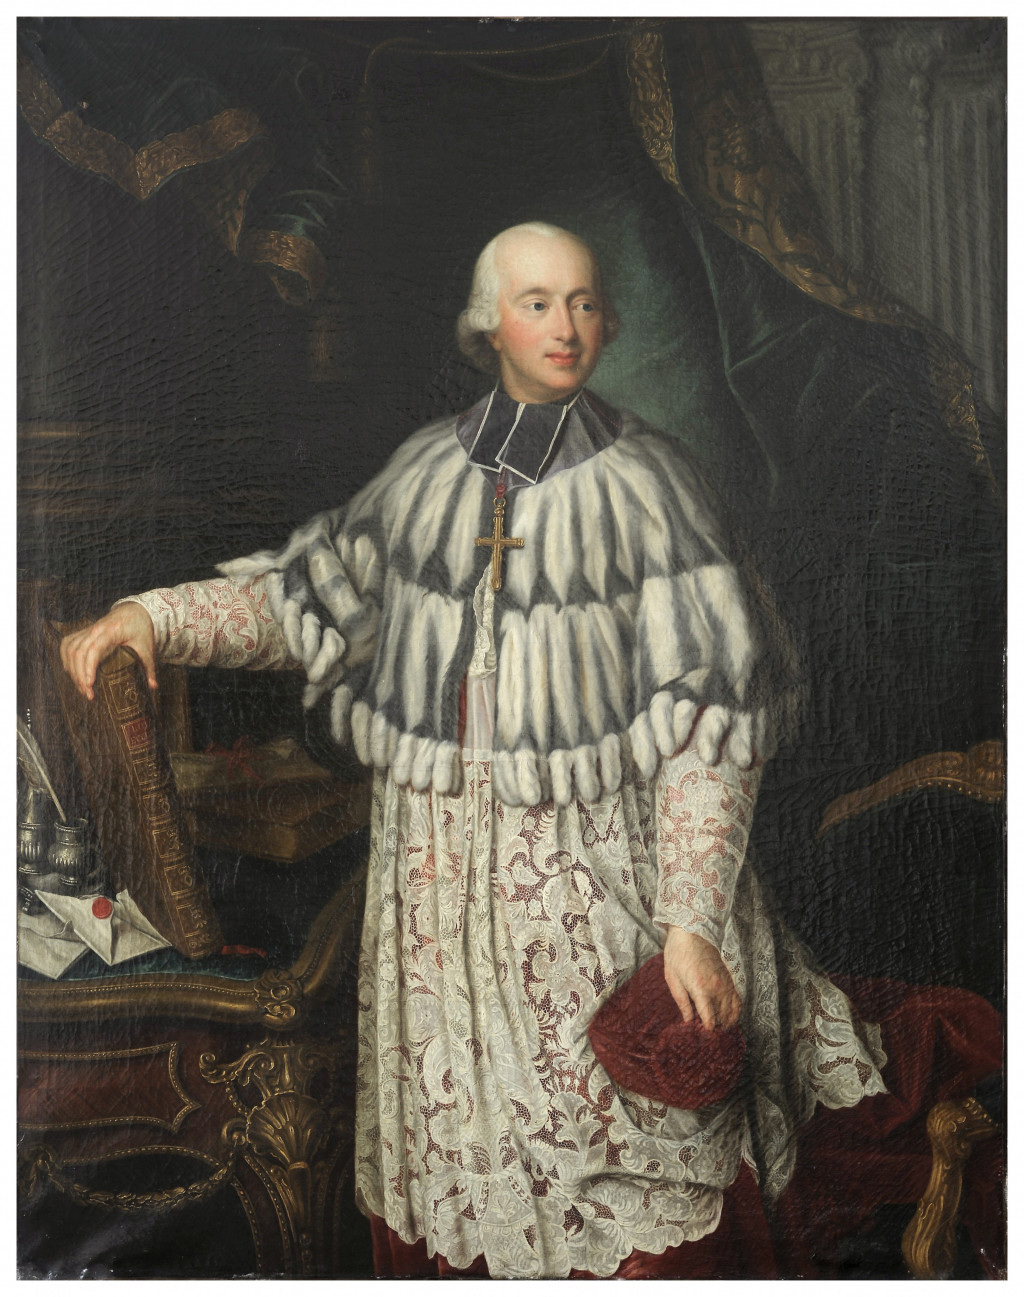 Painted portrait of the cardinal in official attire. 